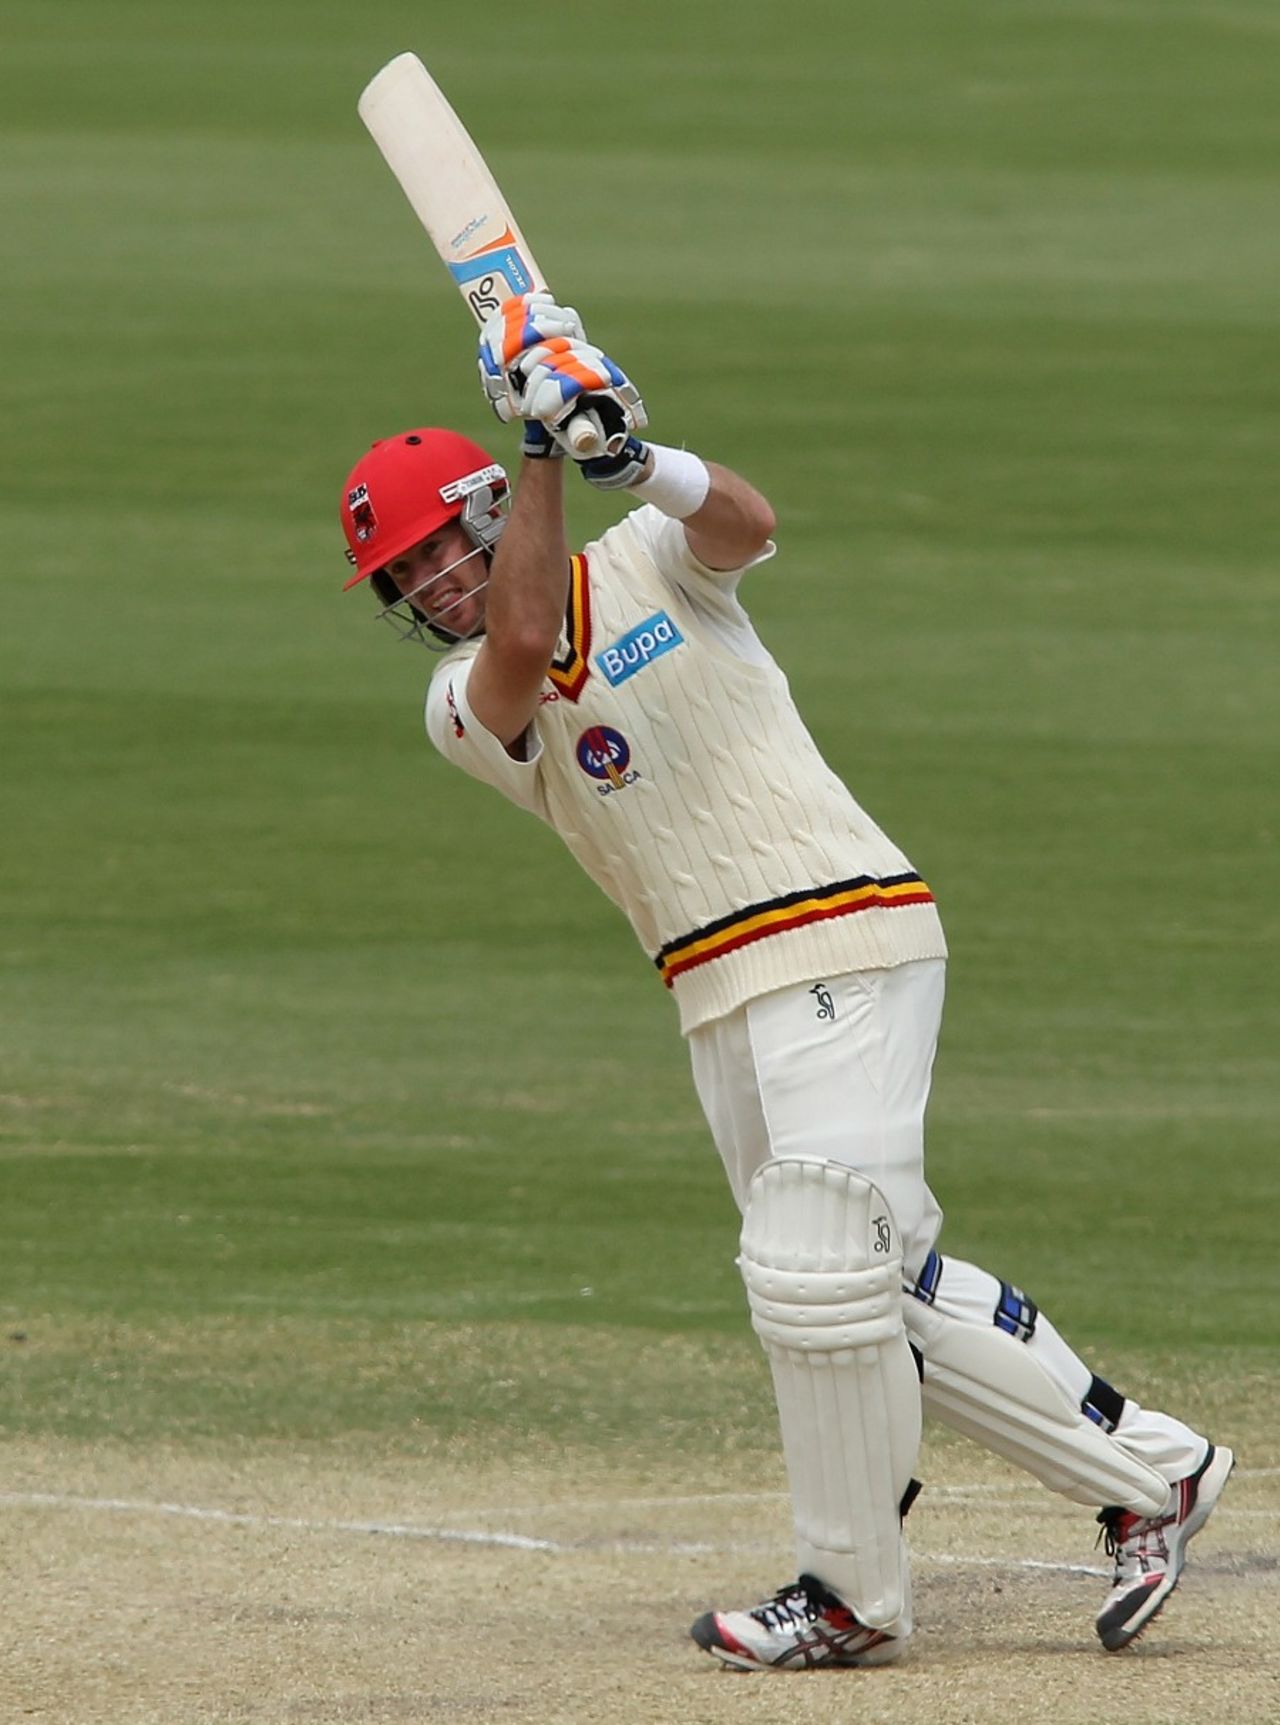 Daniel Chistian drives one down the ground, South Australia v Queensland, Sheffield Shield, Adelaide, 4th day, October 26, 2012